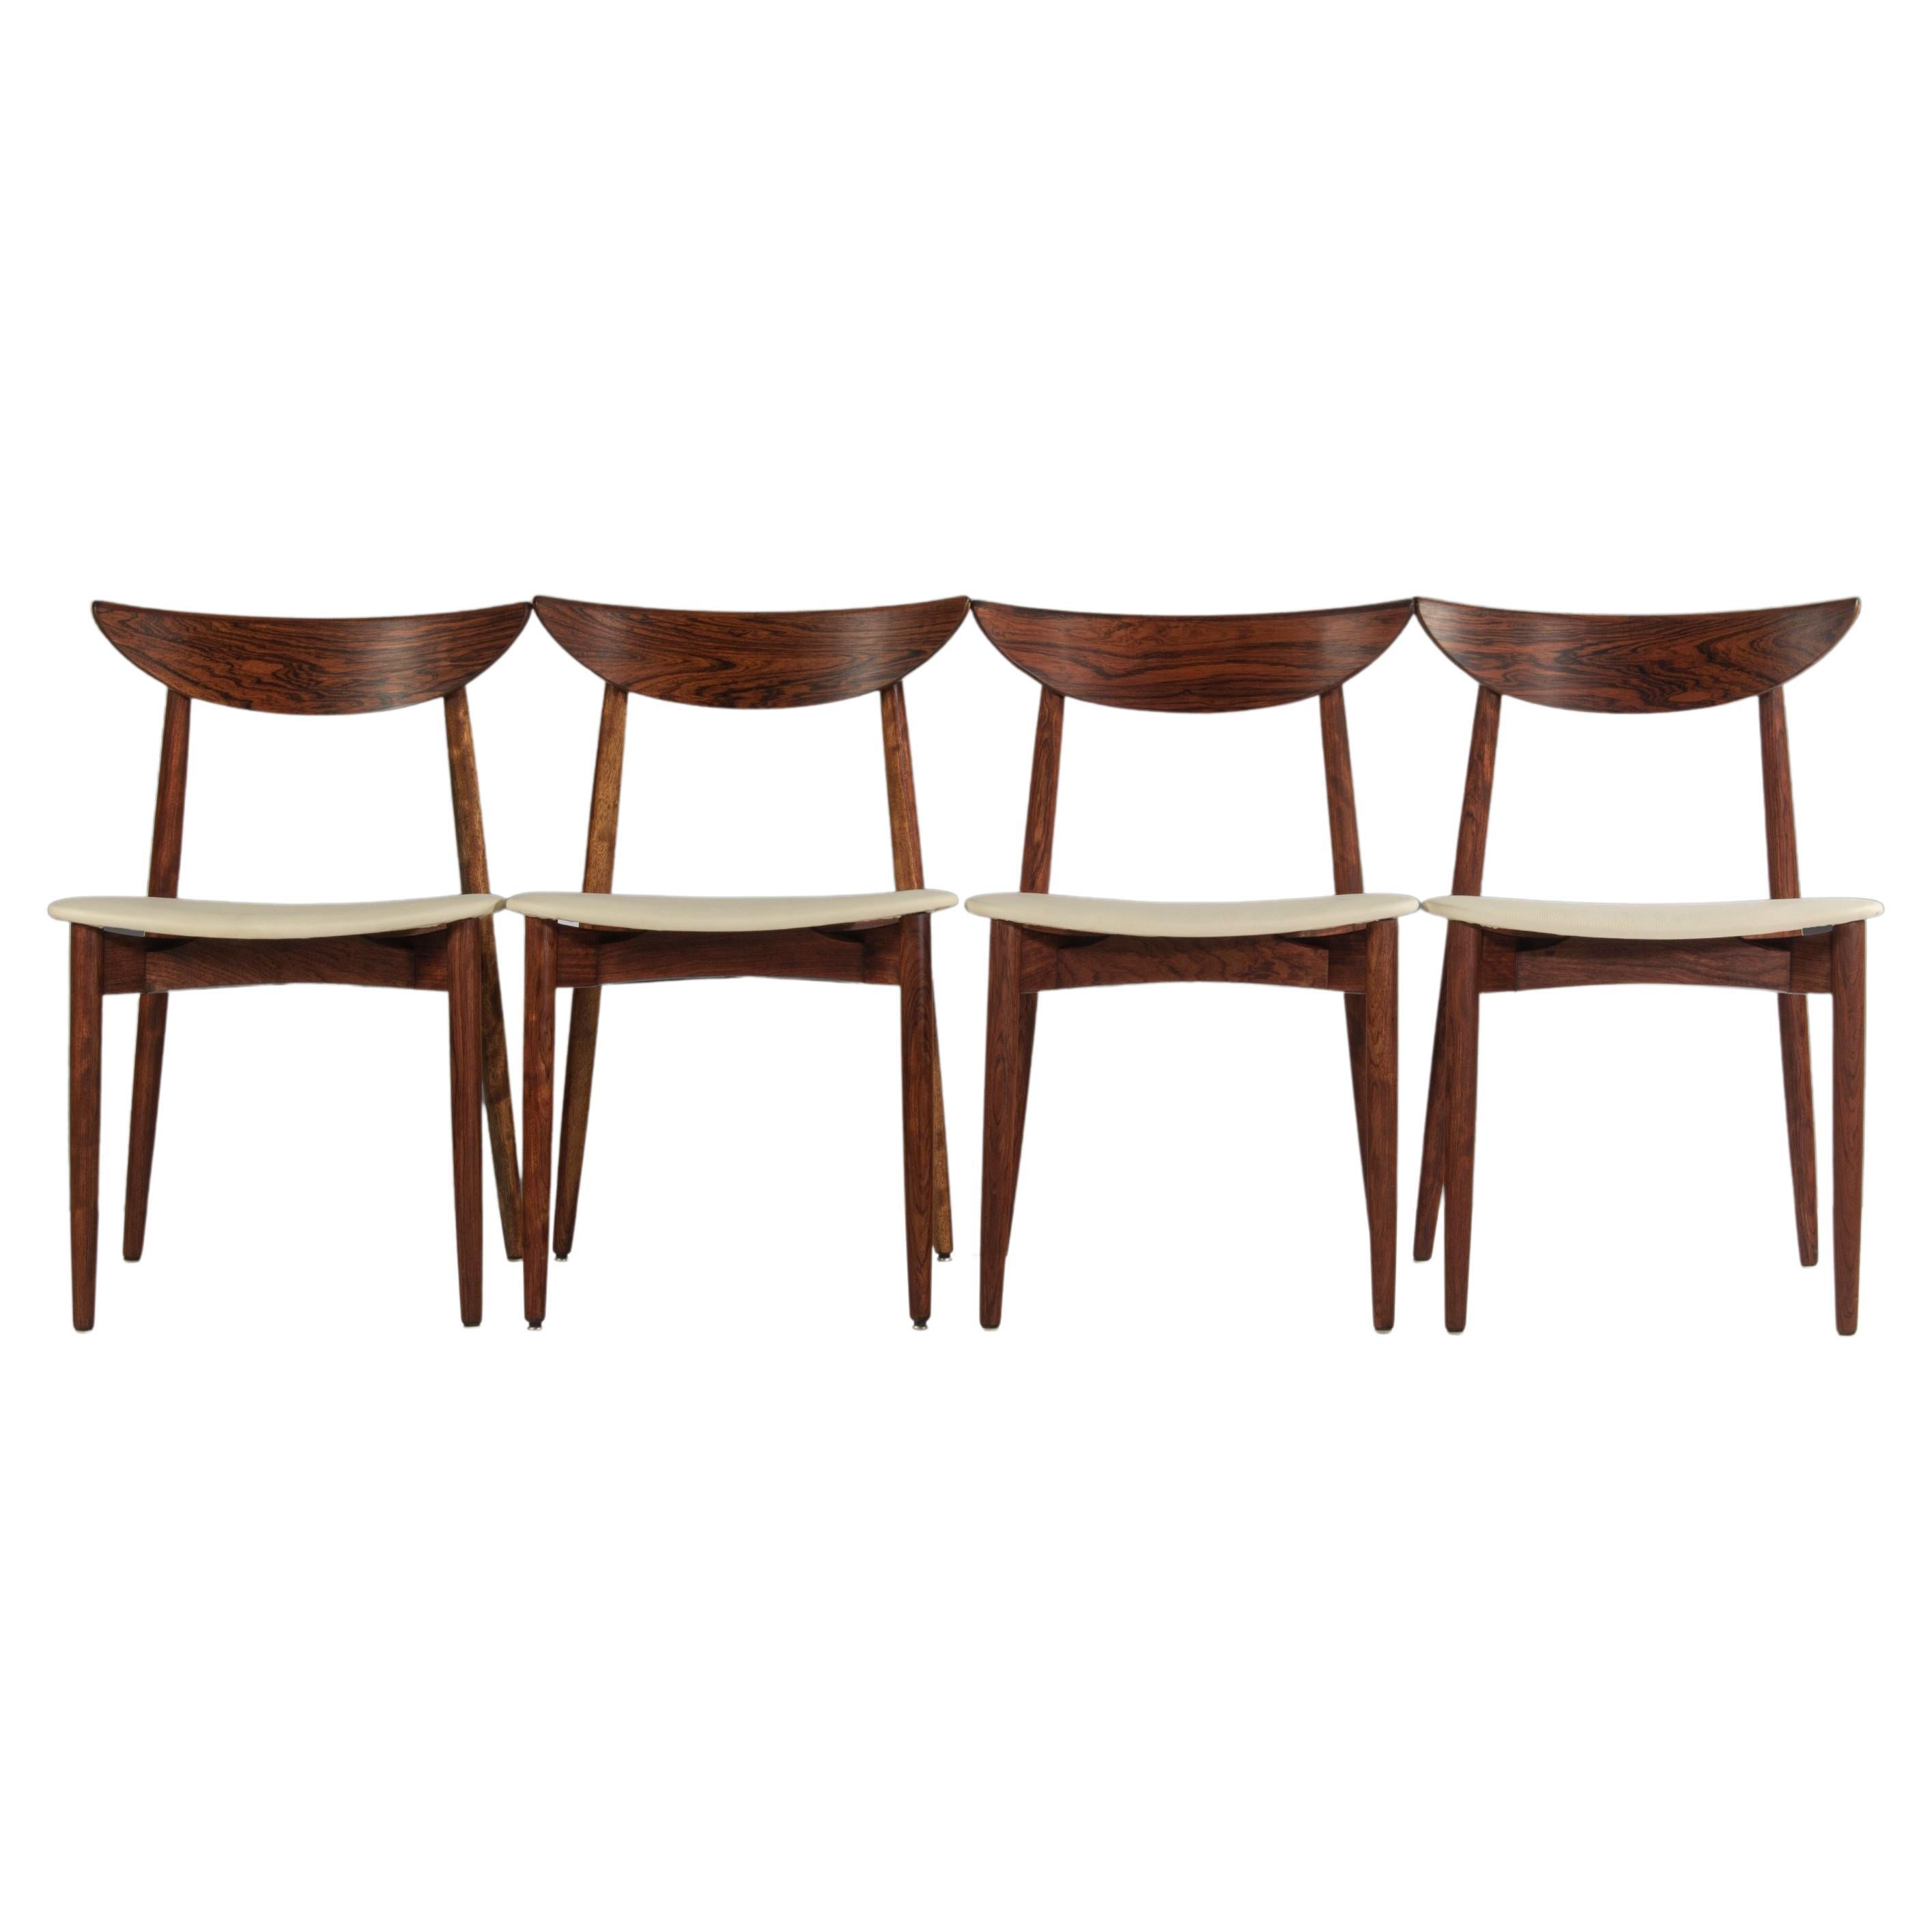 Set of Four '4' Dining Chairs by Harry Ostergaard for Randers in Rosewood, 1960s For Sale